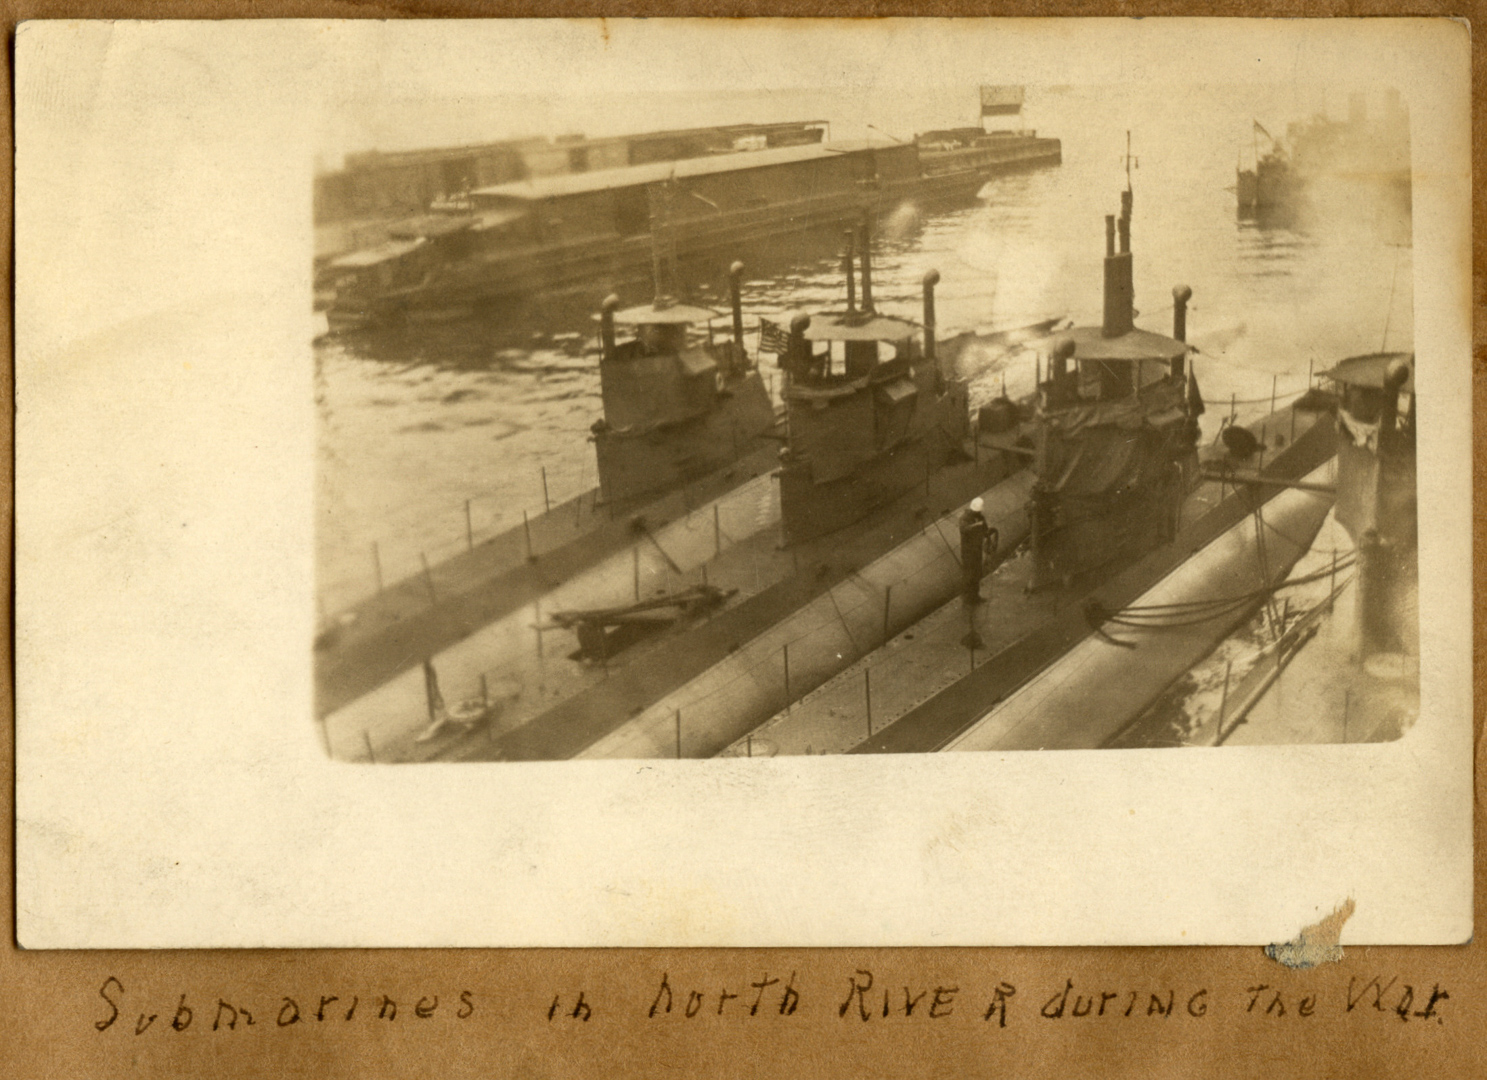 Submarines in North River during the War